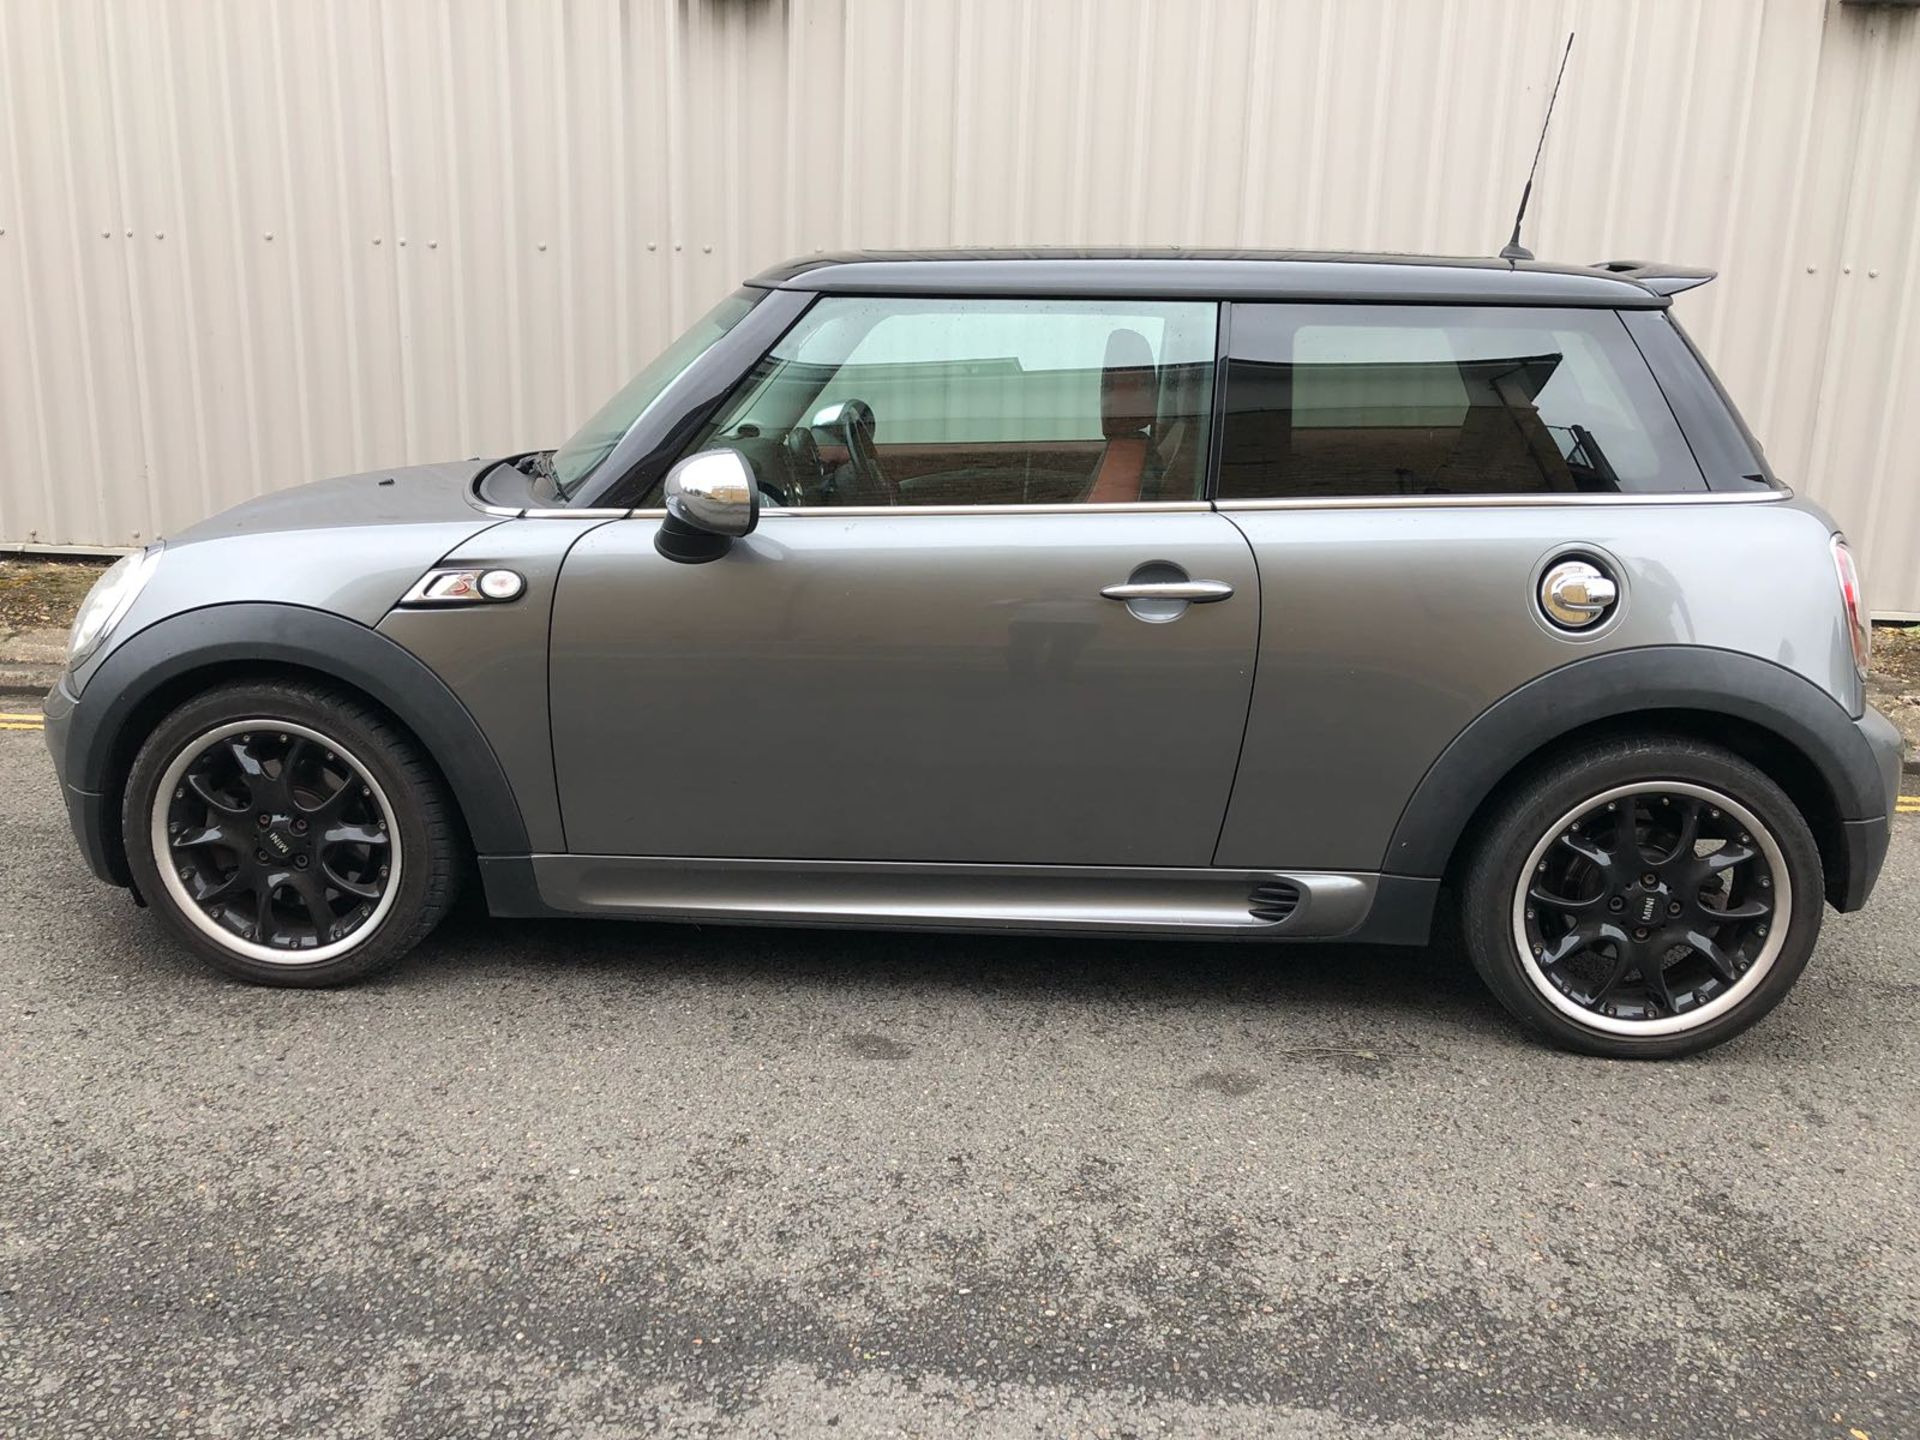 MINI COOPER S JOHN WORKS. 2009/09. 79,000 miles. Full history with 9 stamps in the book. - Bild 5 aus 19